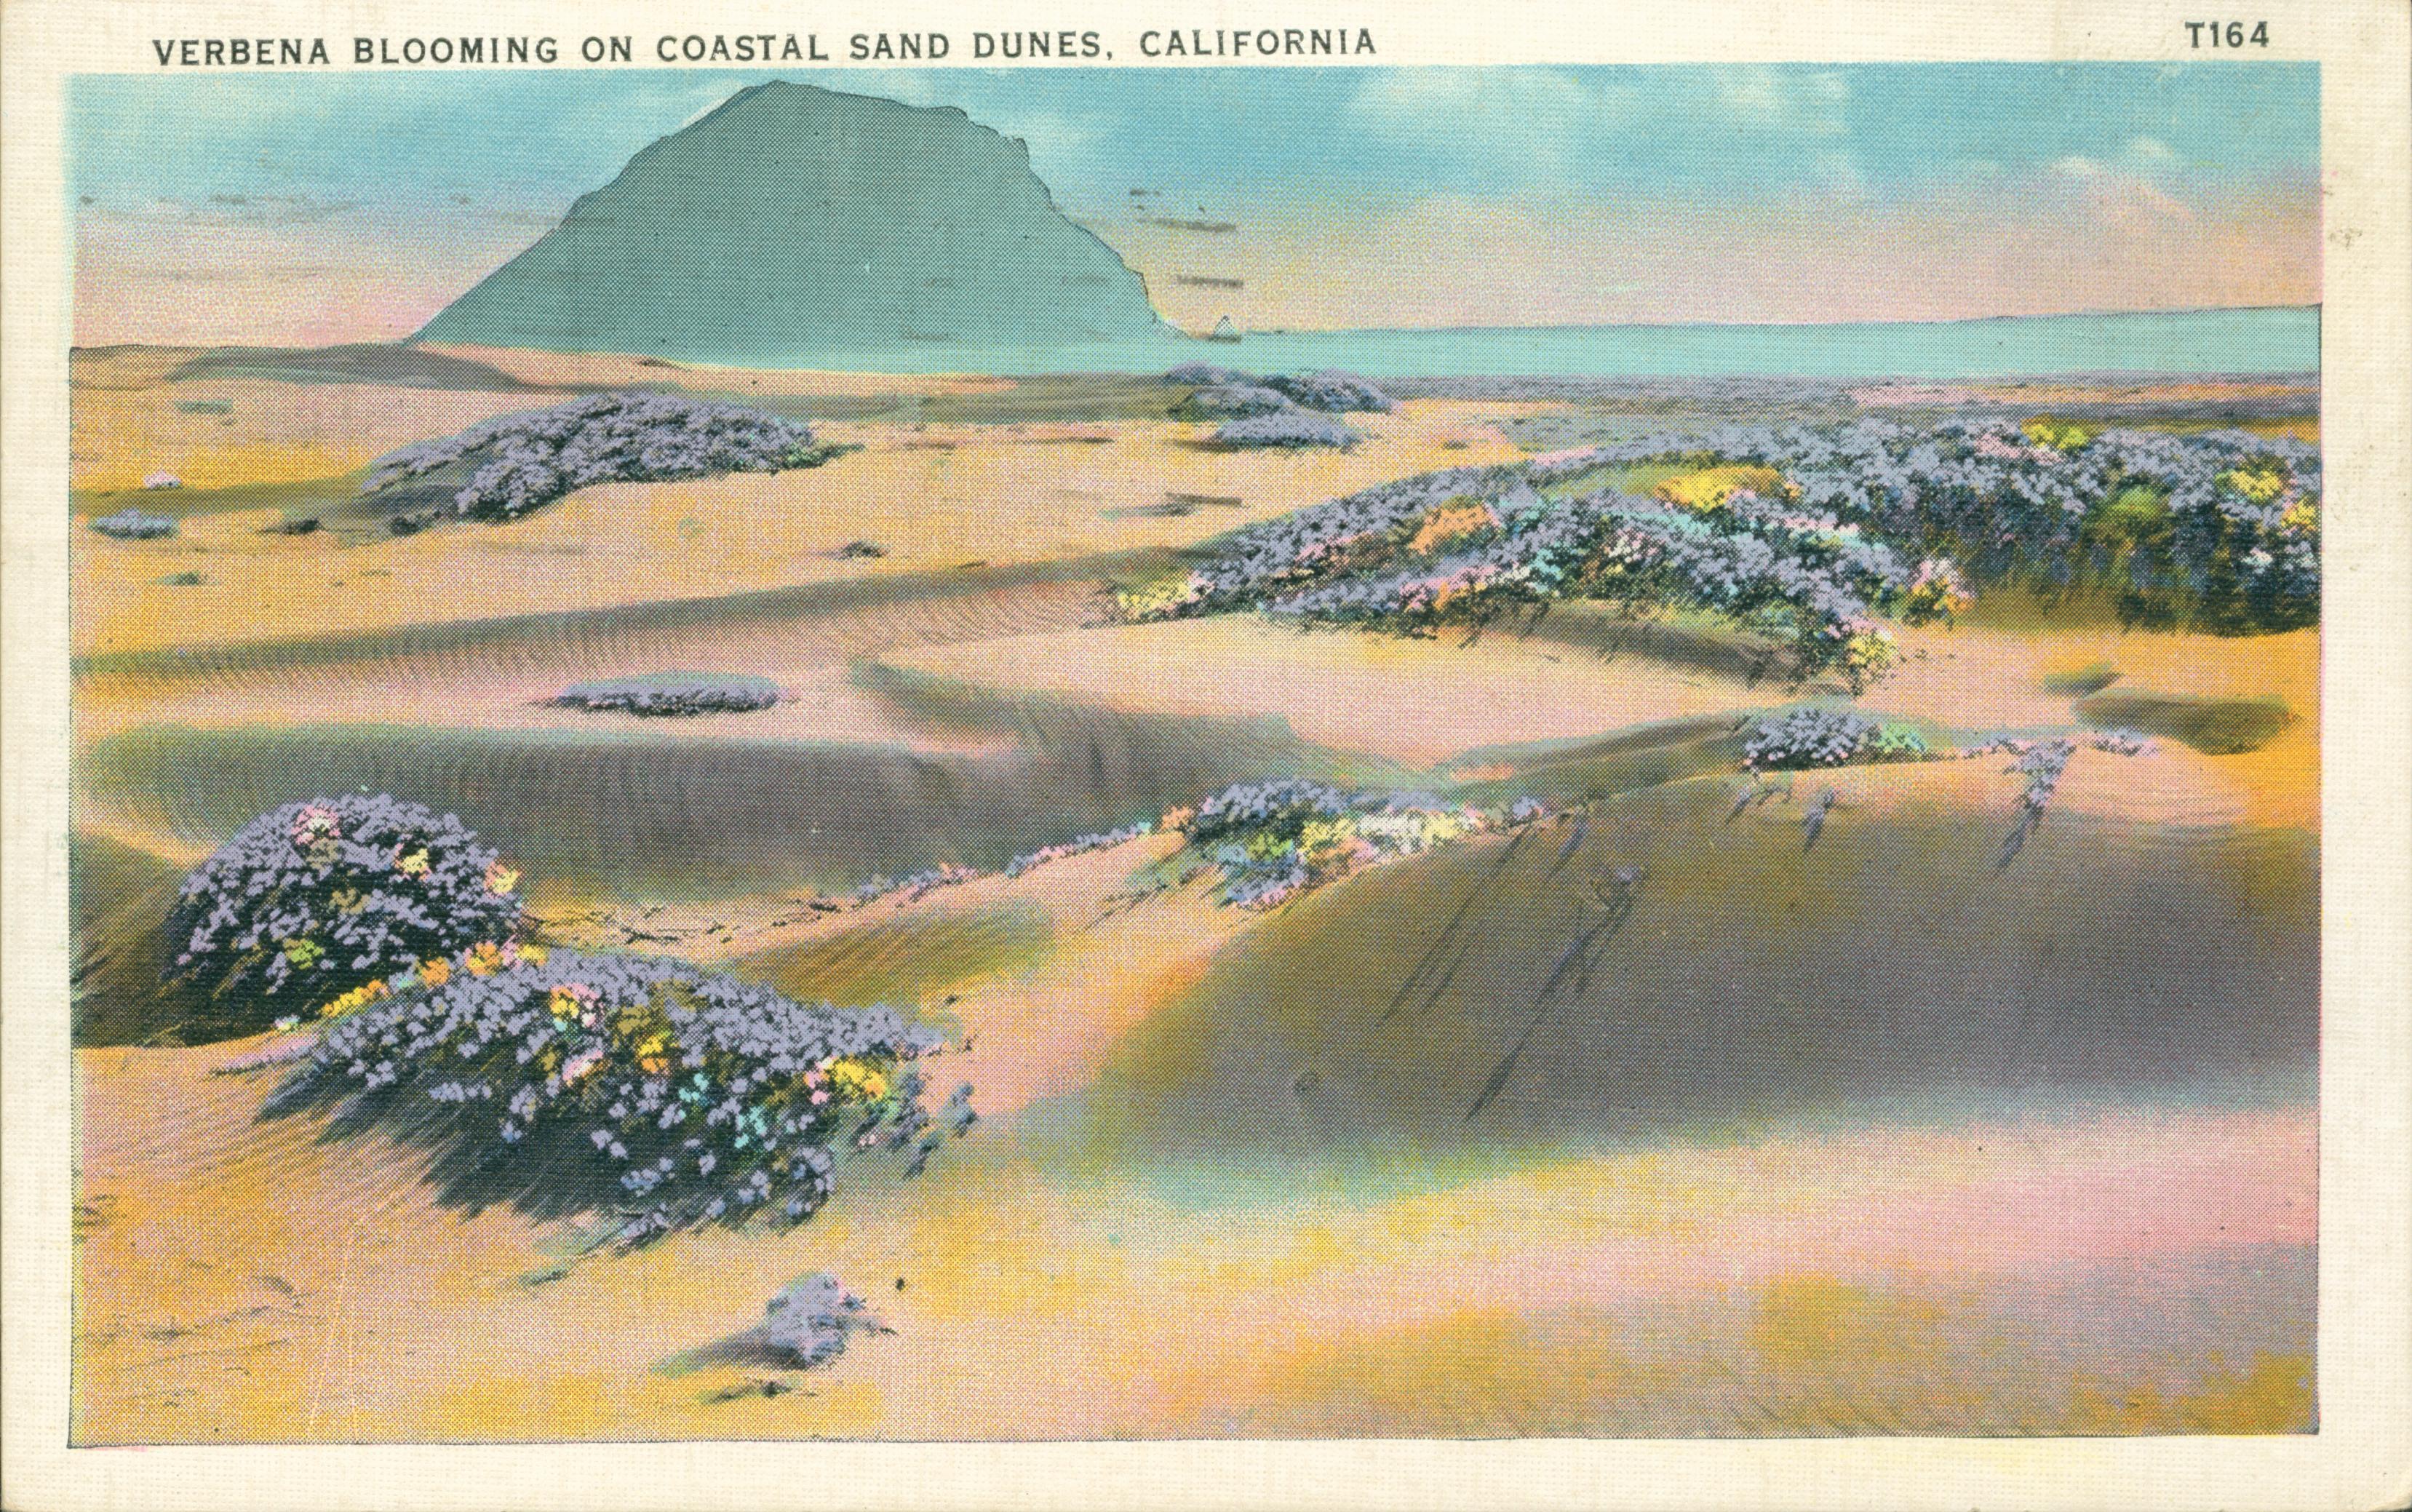 View of dunes with flowering verbena, coastline, water and Morro Rock in distance